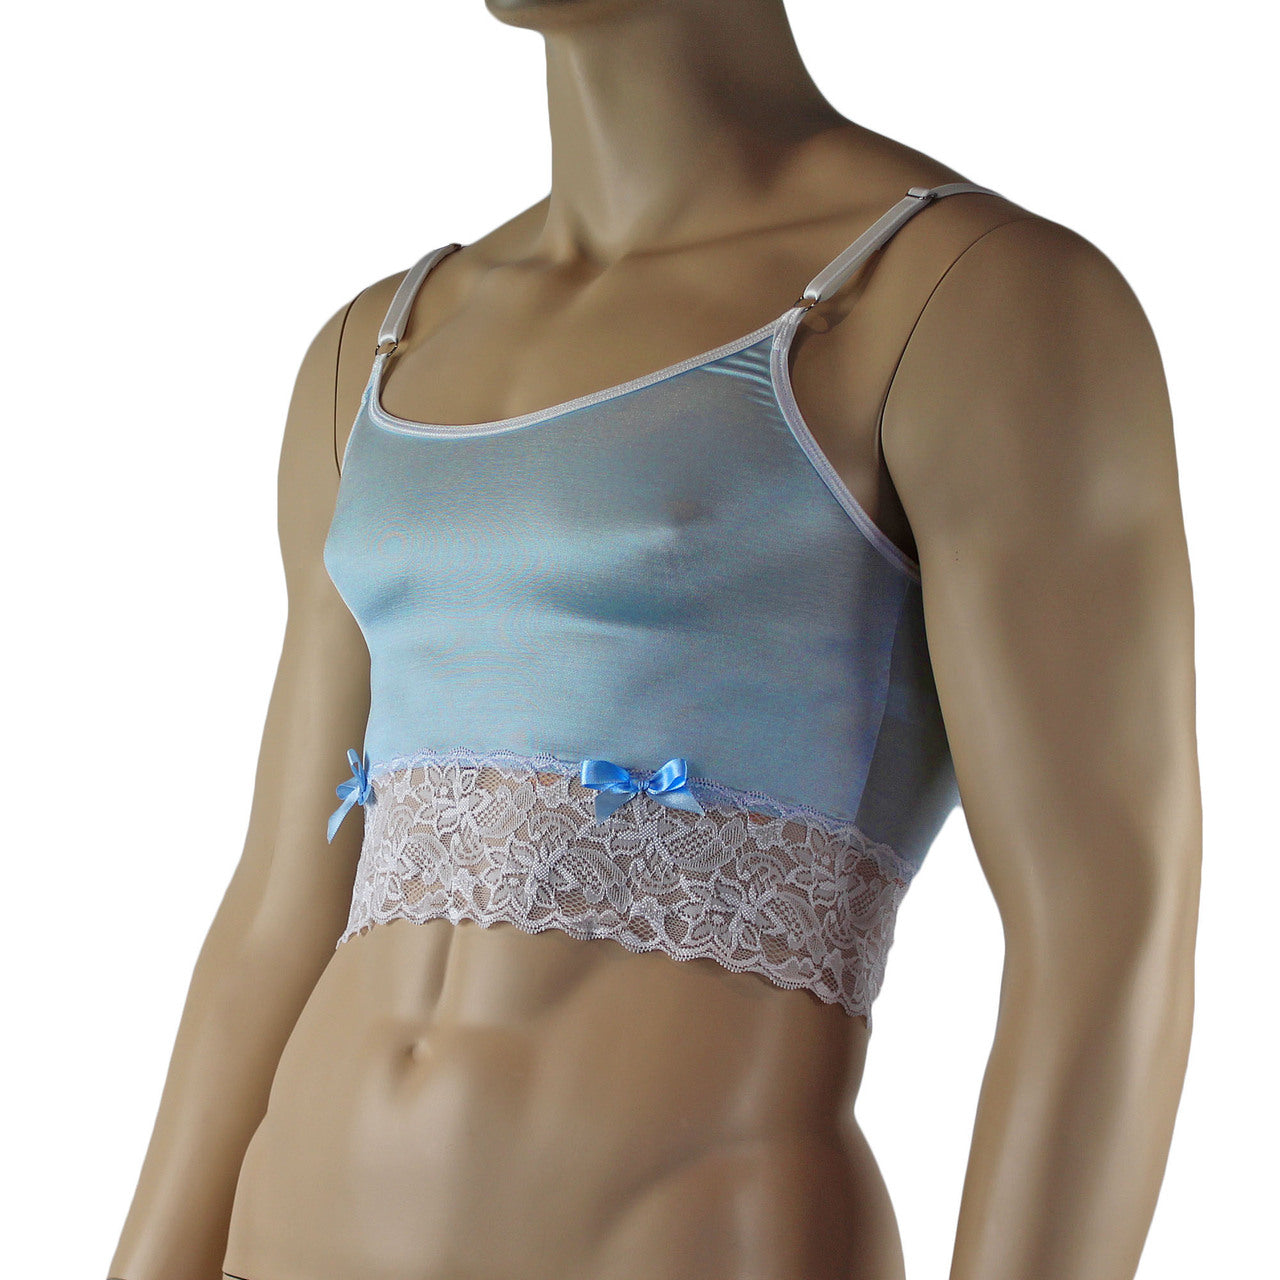 Mens Joanne Satin & Lace Crop Cami Top - Sizes up to 3XL Light Blue and White Lace